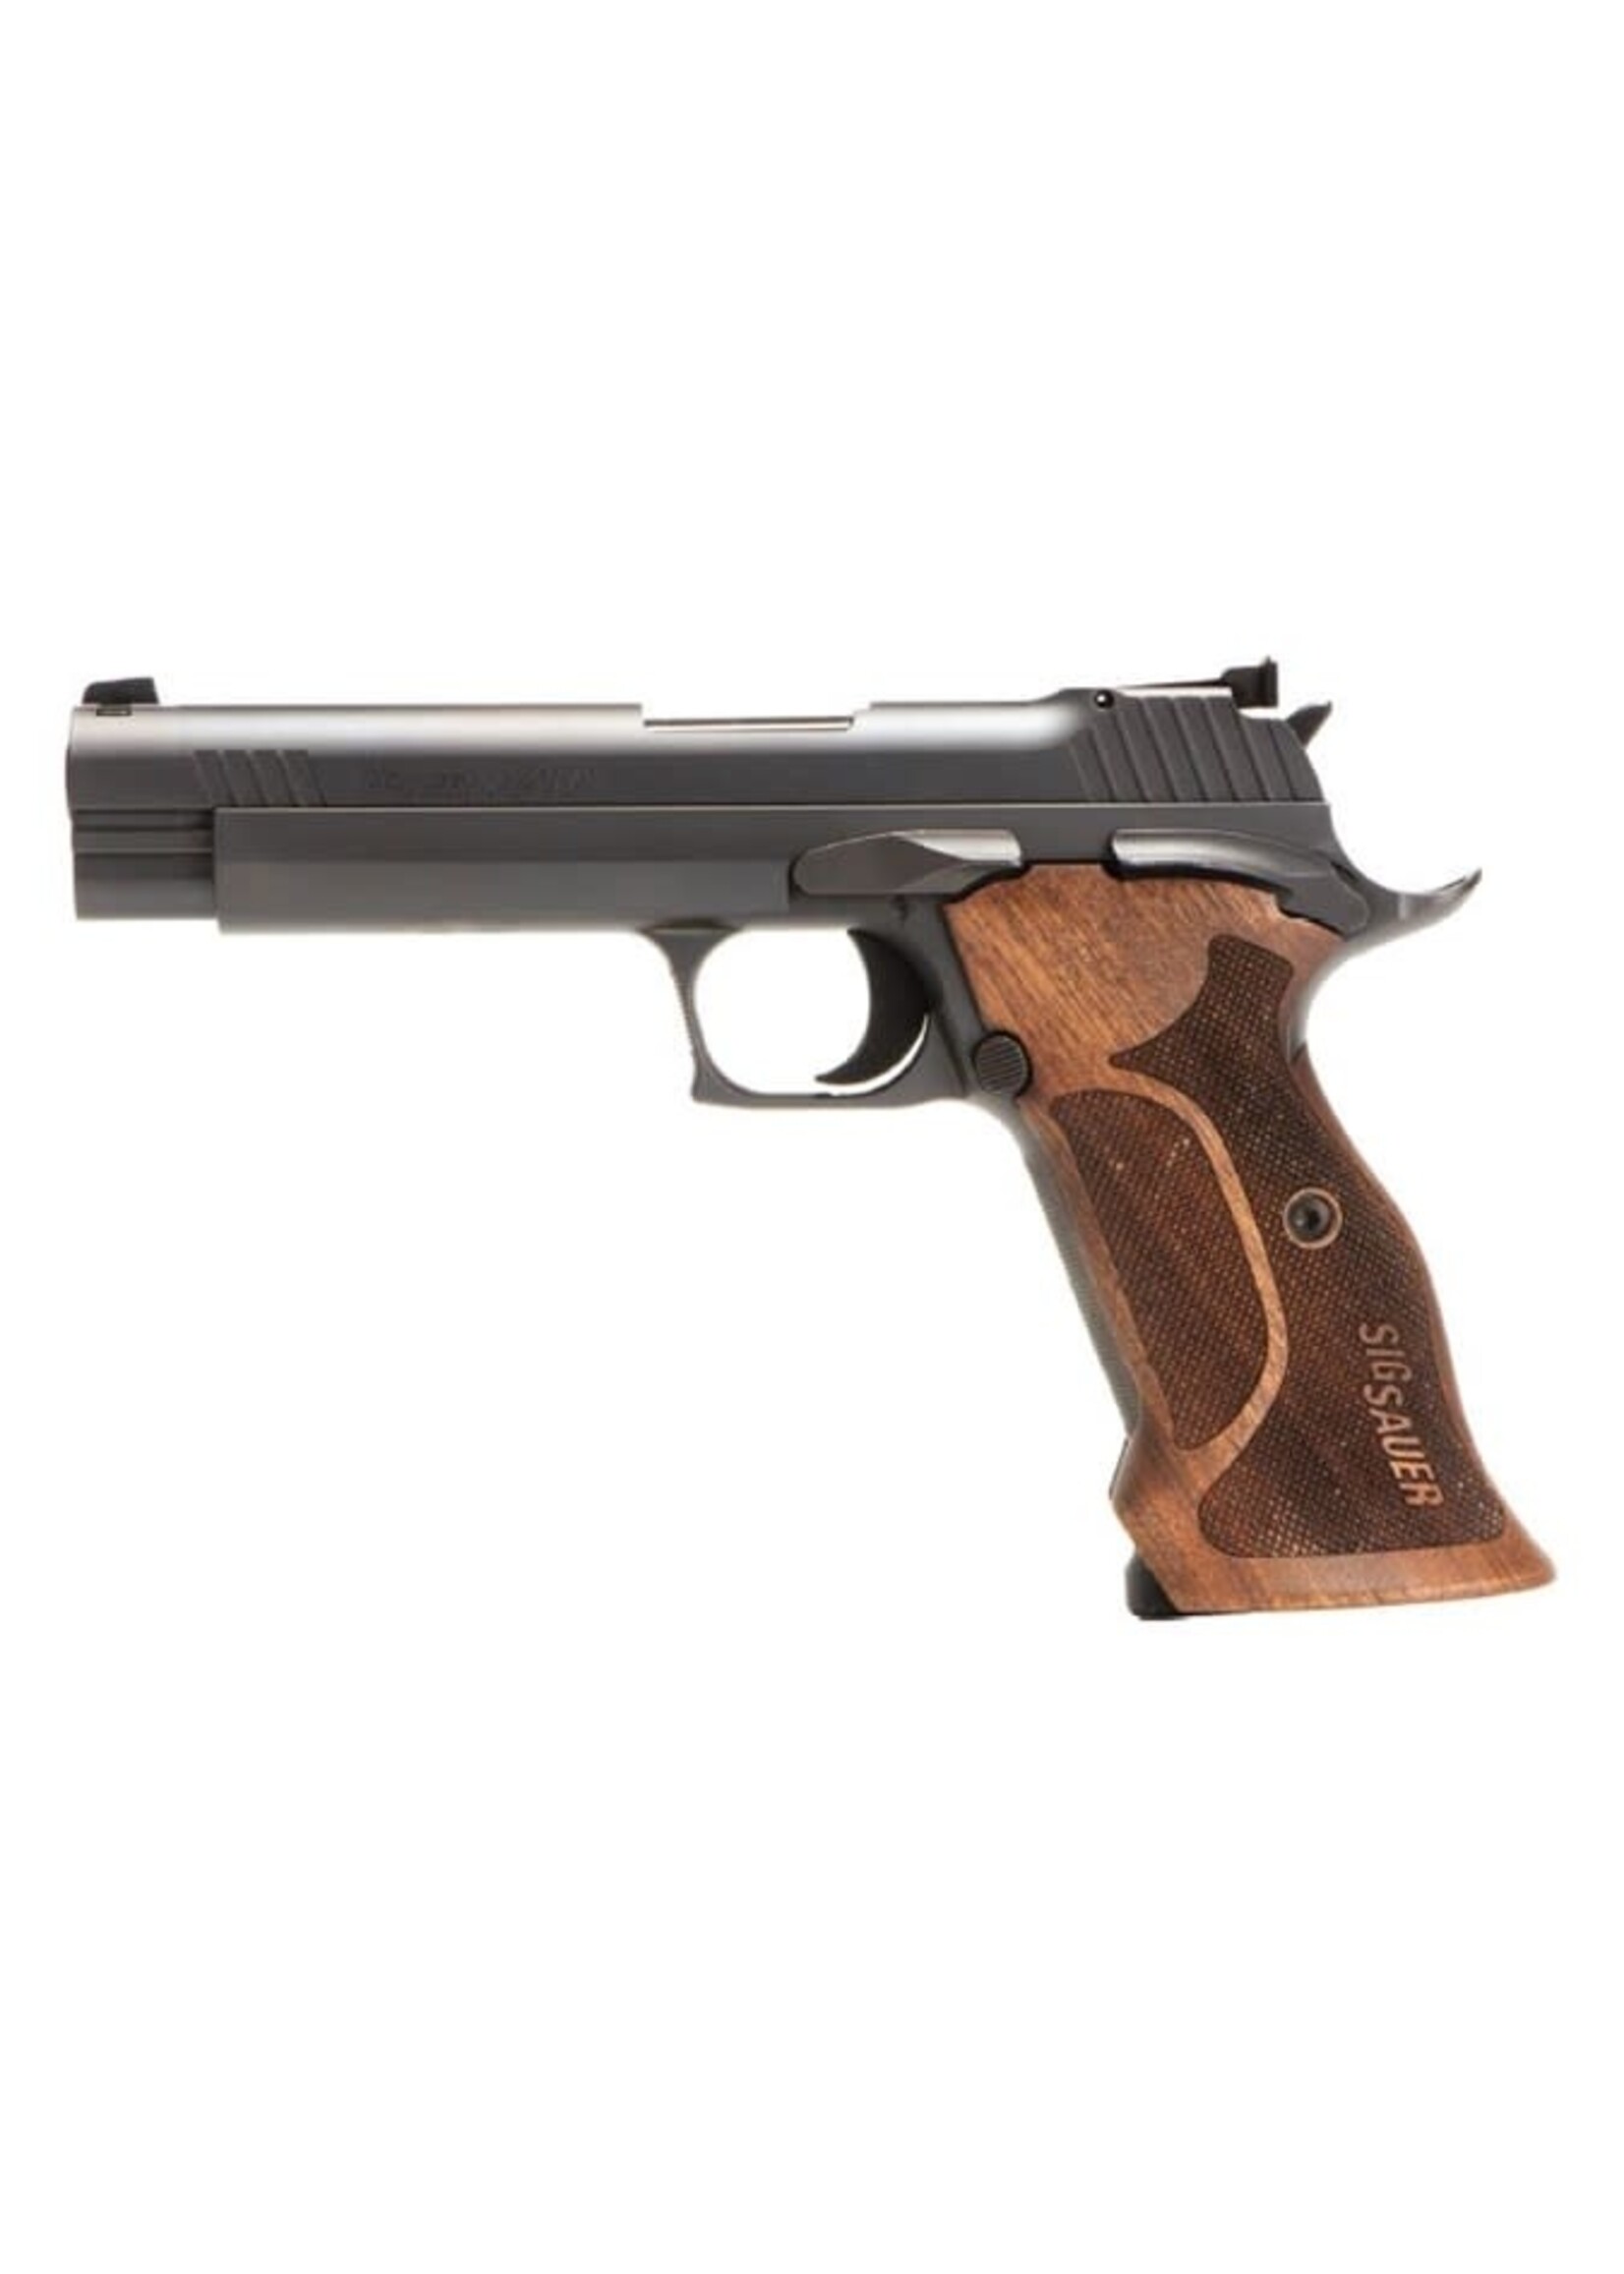 Sig Sauer Sig Sauer, P210, Target, Single Action Only, Semi-automatic, Metal Frame Pistol, Full Size, 9MM, 5" Barrel, Steel, Nitron Finish, Black, Walnut Grips, Manual Thumb Safety, 8 Rounds, Target Grade Trigger, 2 Magazines